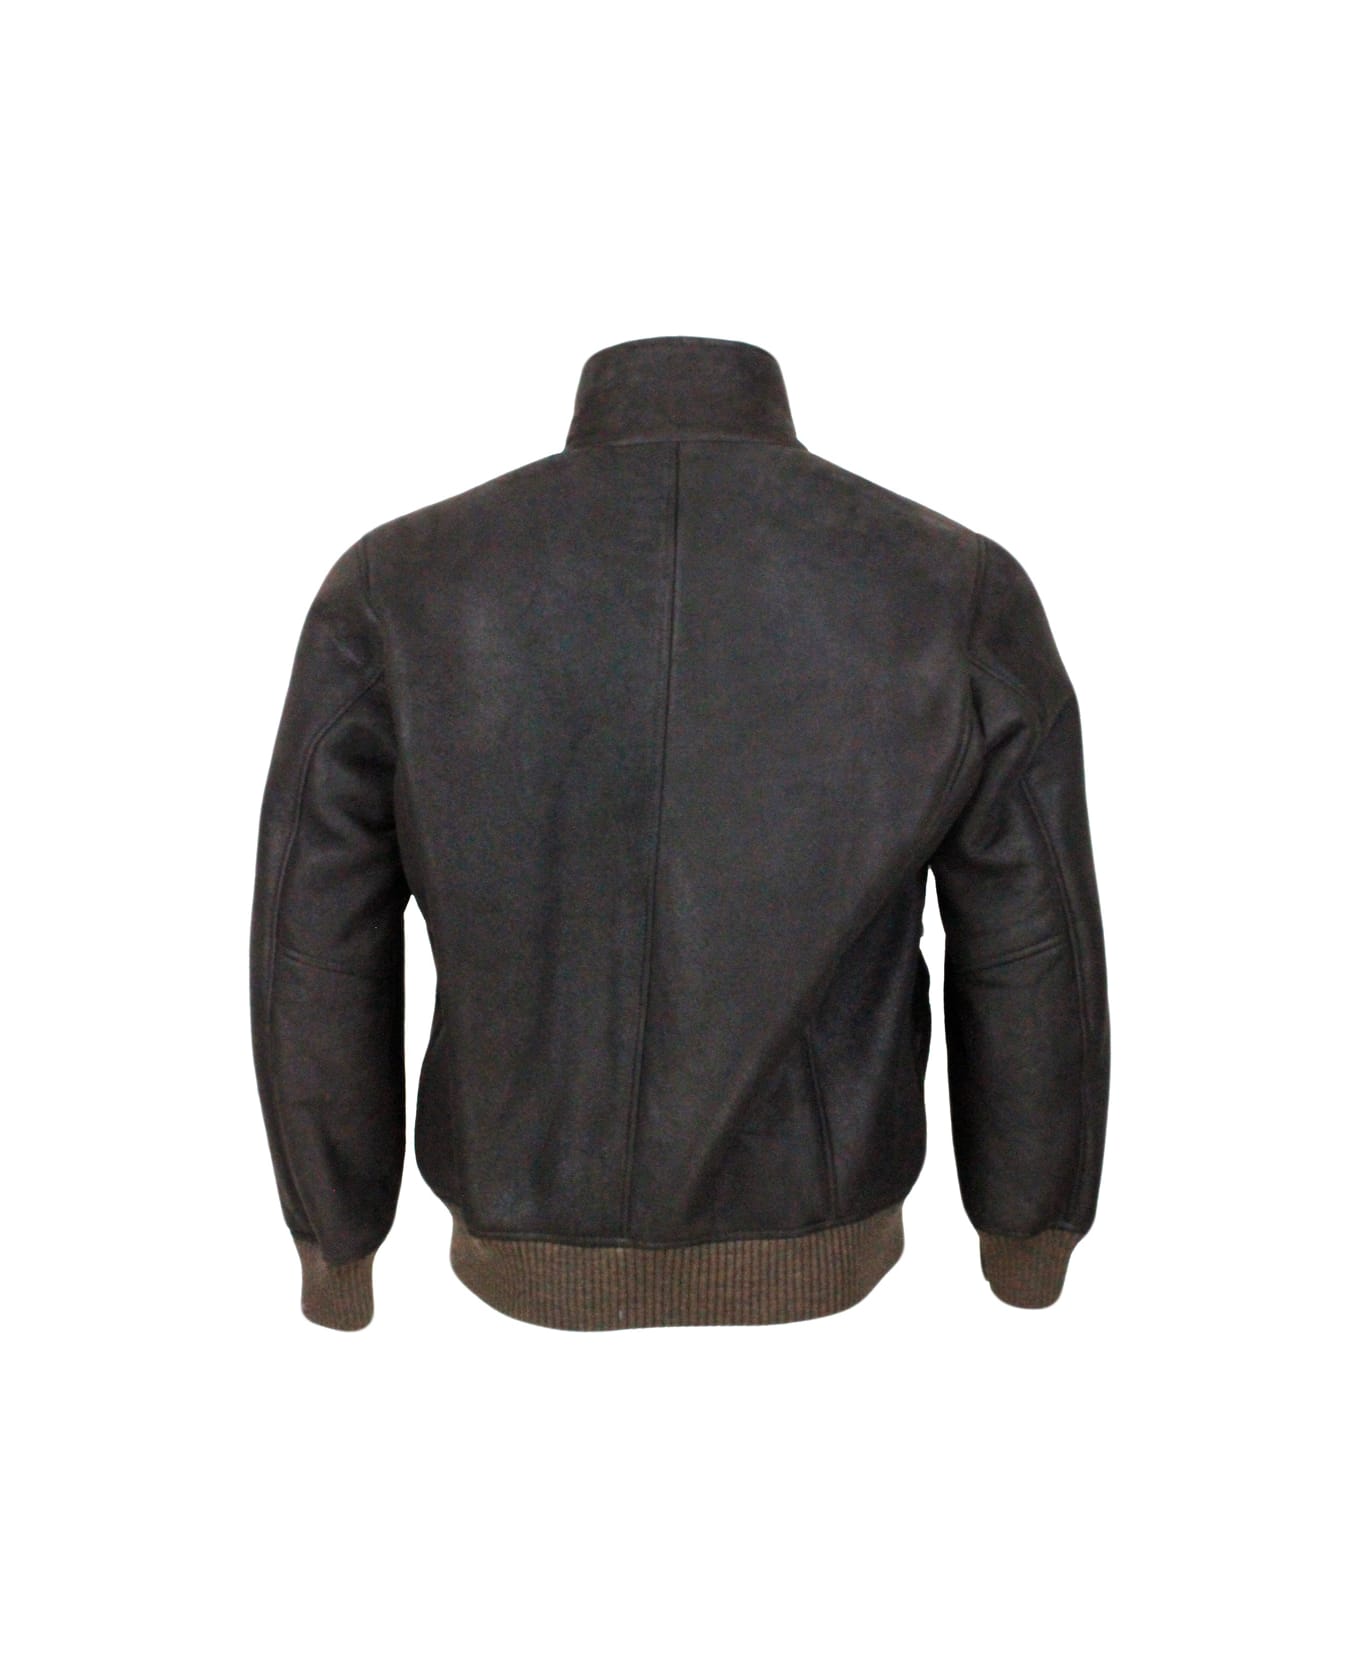 Barba Napoli Bomber Jacket In Fine And Soft Shearling Sheepskin With Stretch Knit Trims And Zip Closure. Front Pockets - Brown